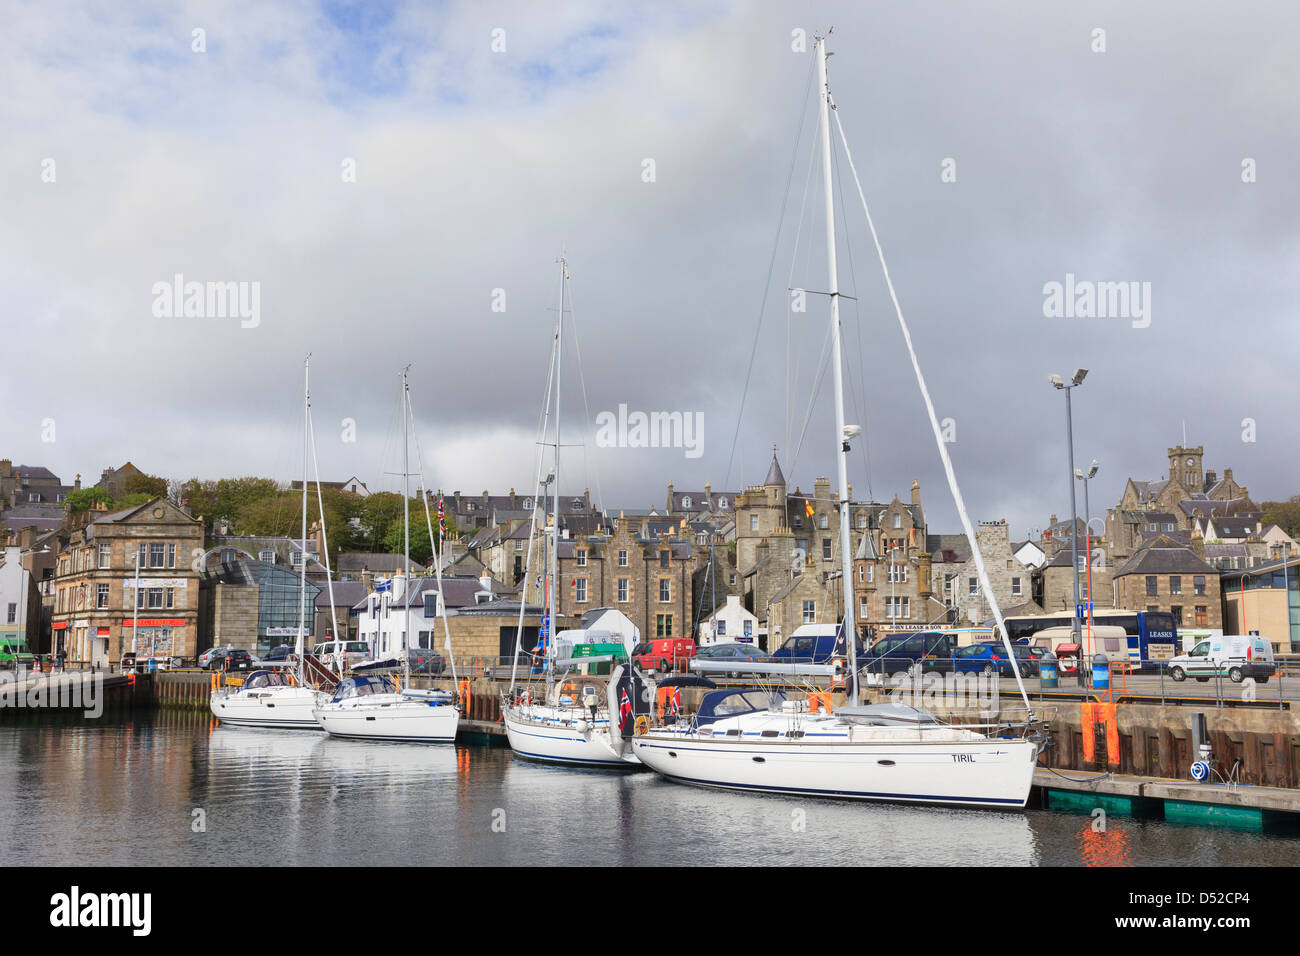 Yachts moored in small boat harbour with old town waterfront buildings in Lerwick, Mainland Shetland Islands, Scotland, UK Stock Photo